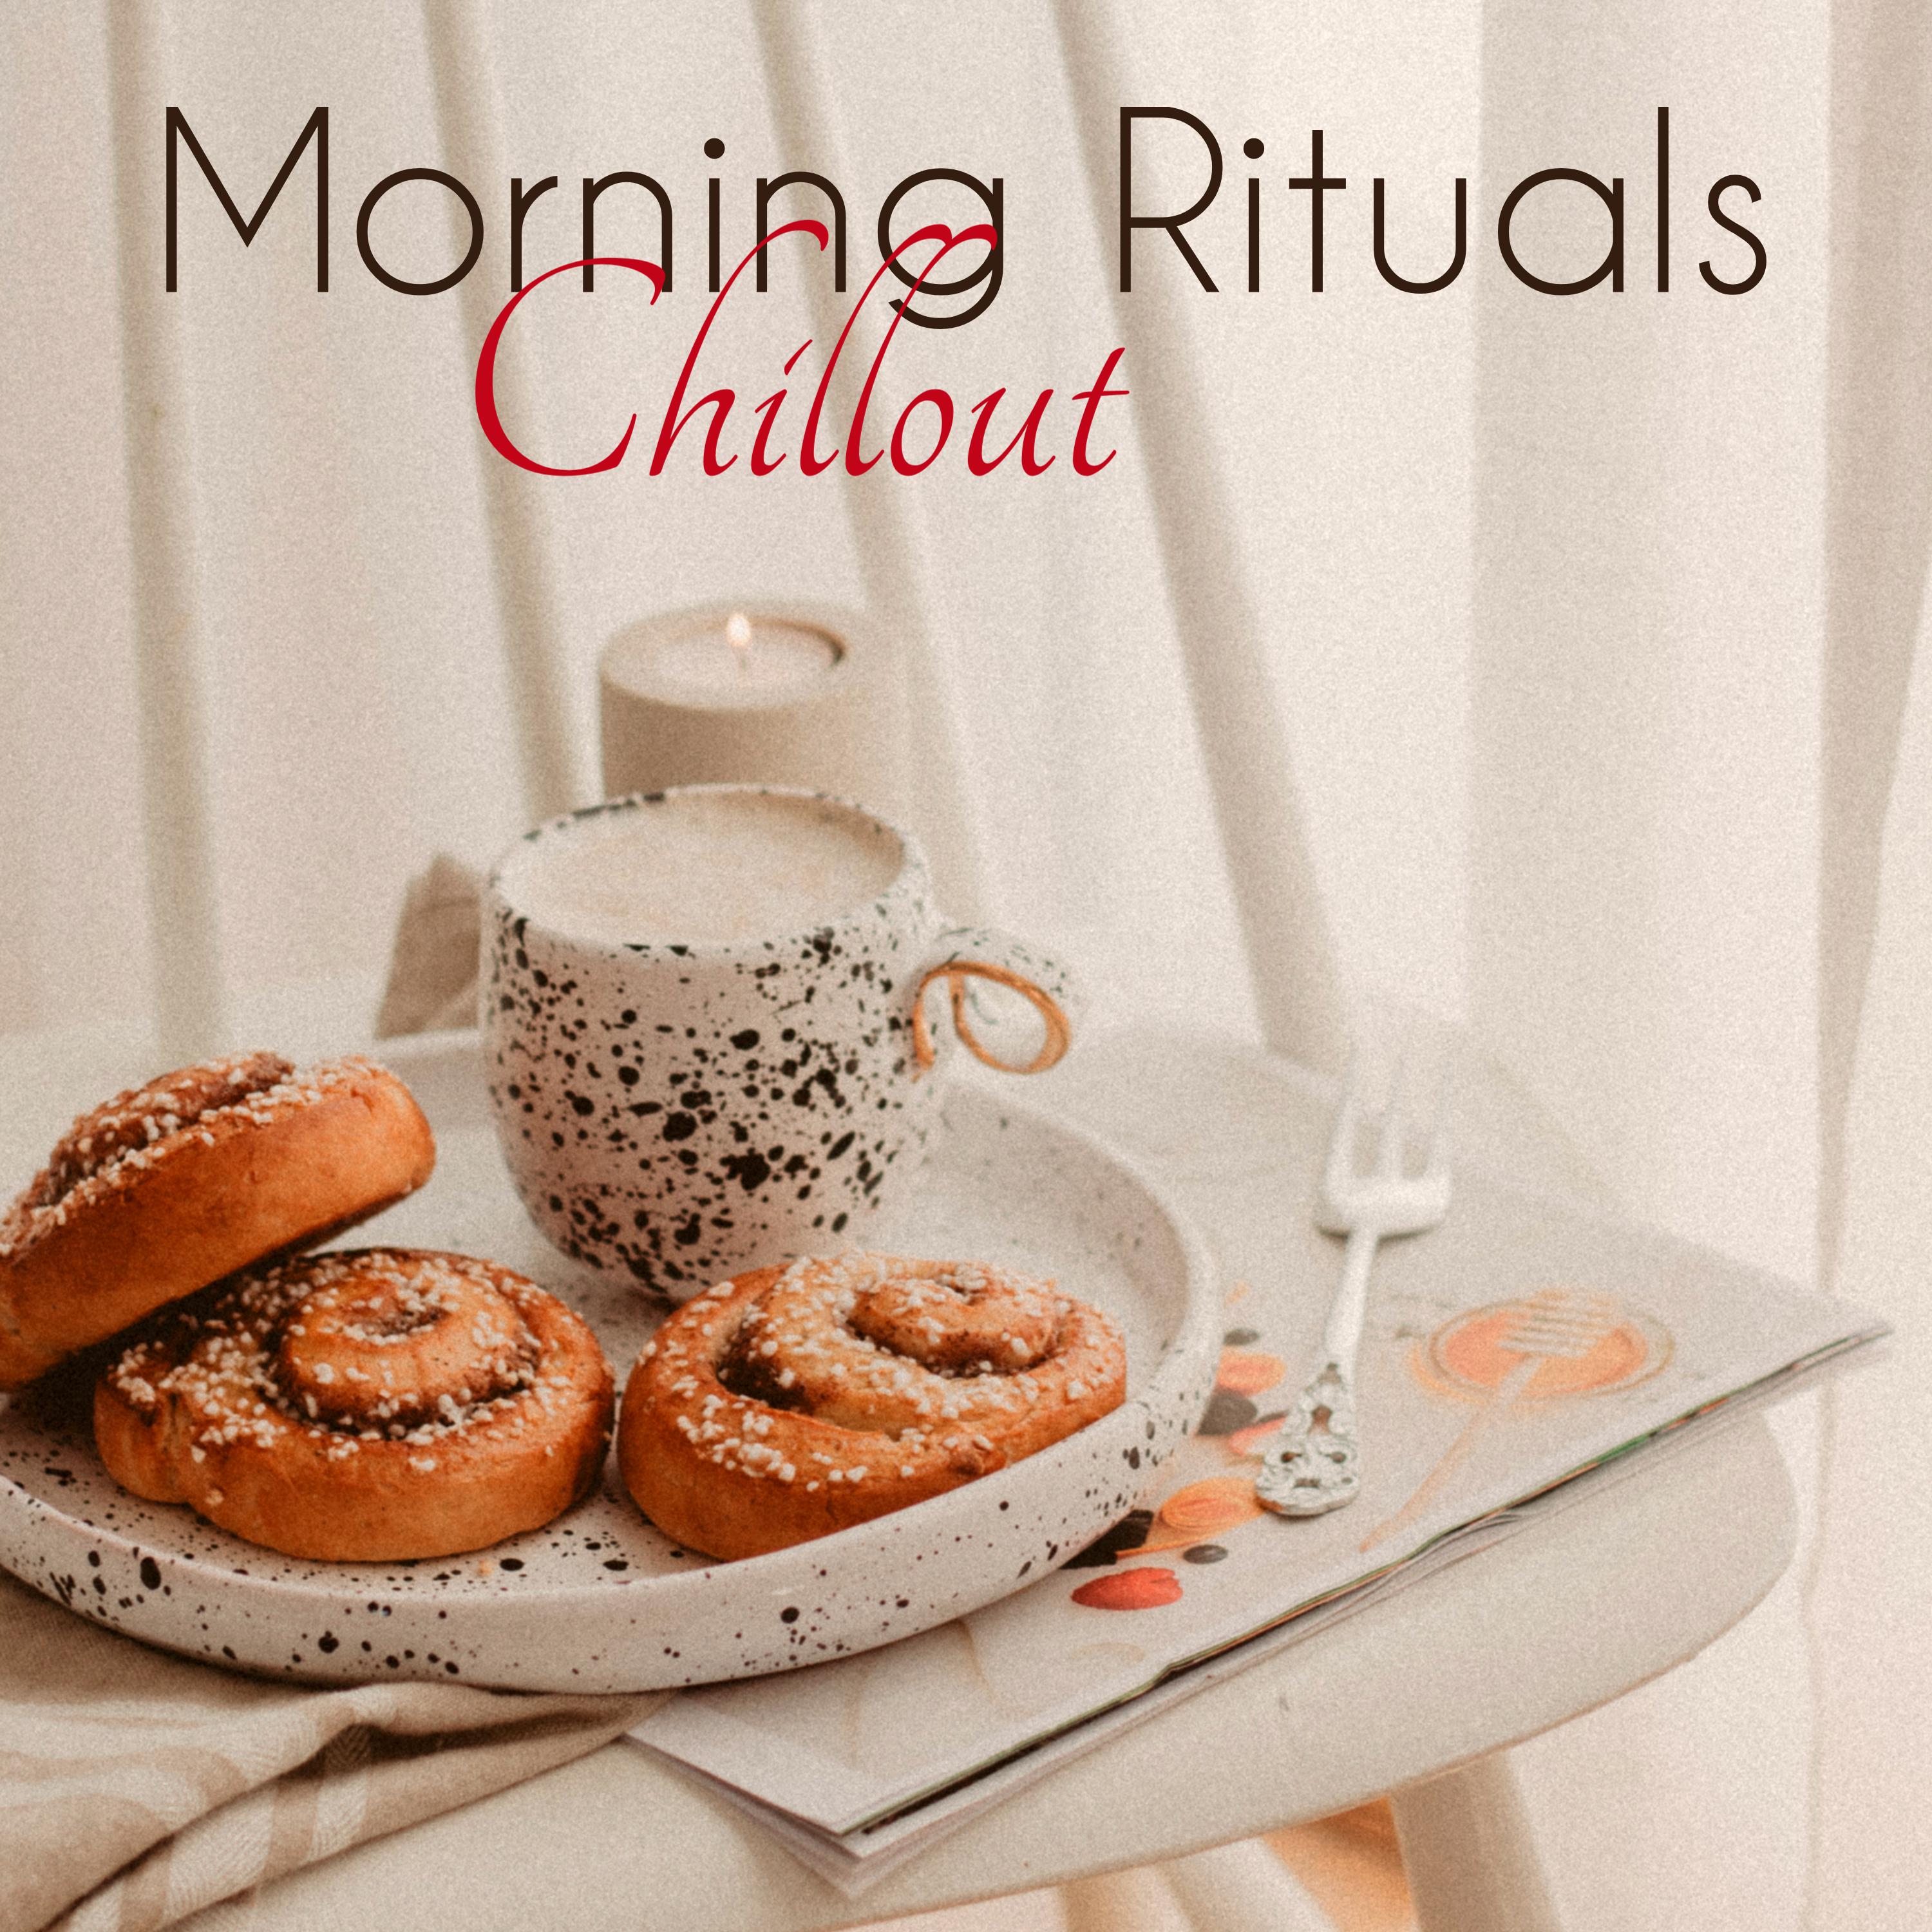 Morning Rituals  Chillout  Shower Music, Wake Up Soundscapes and Breakfast Playlist for a Perfect Day